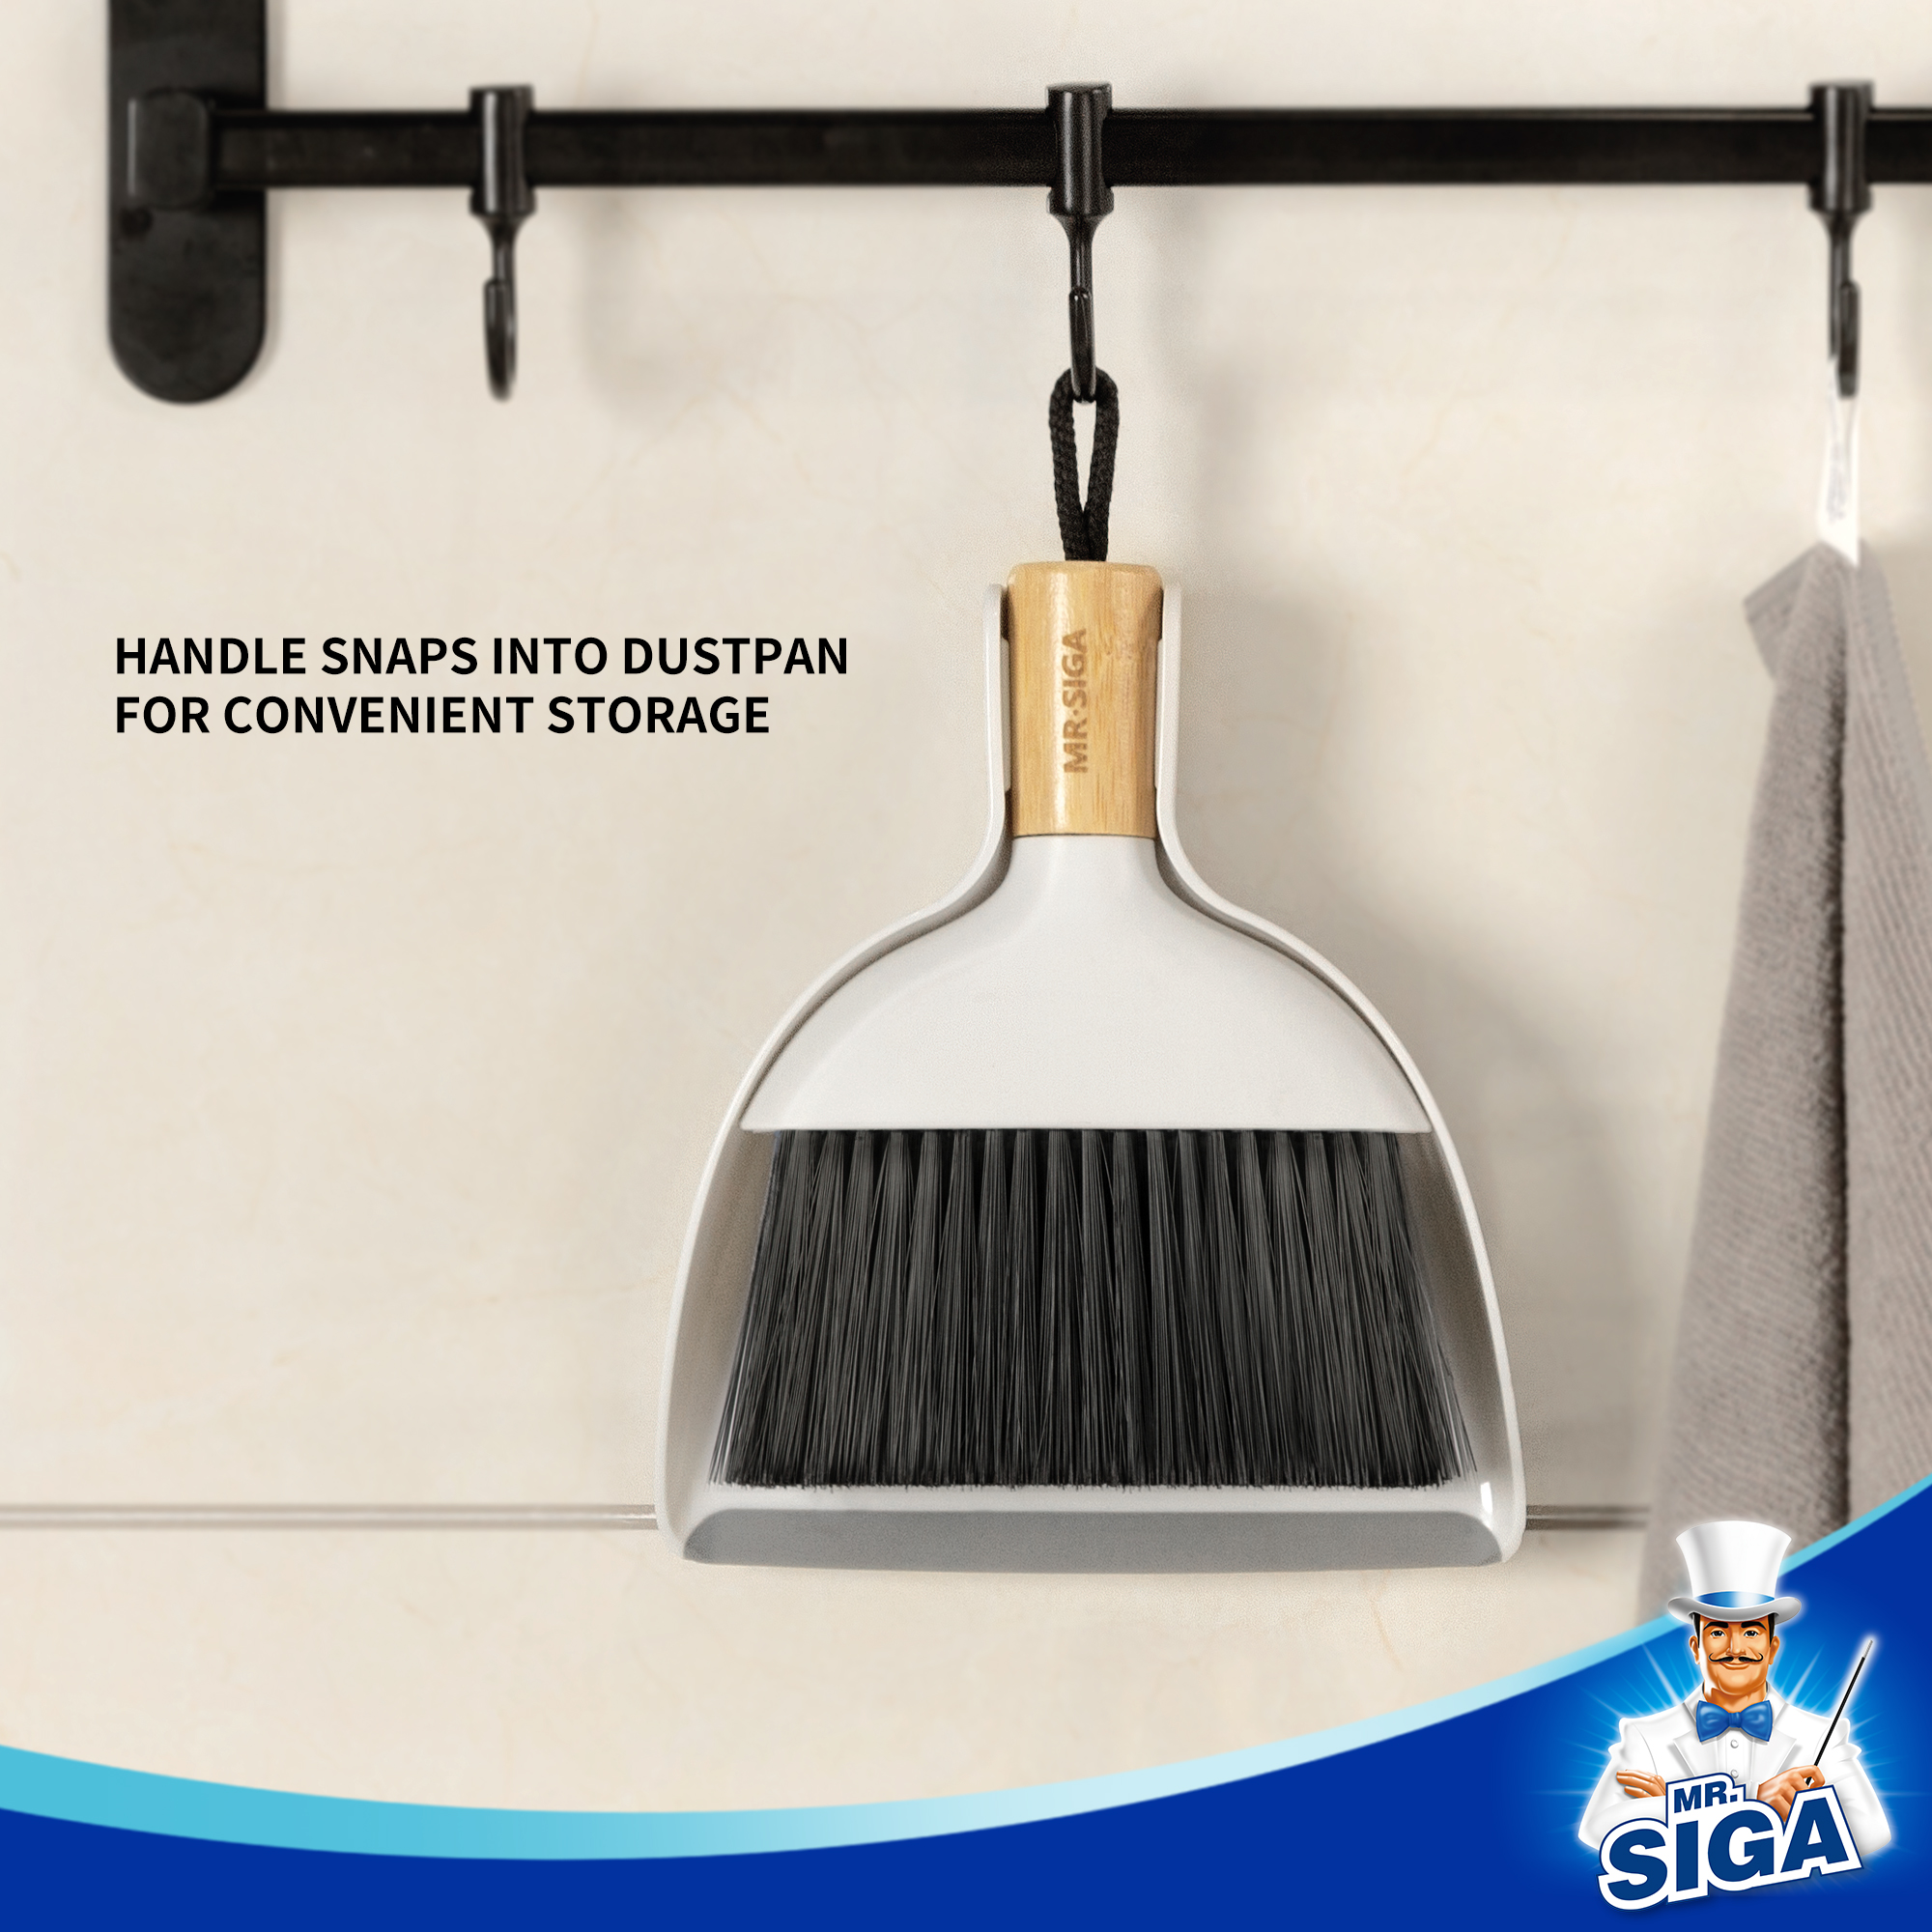 MR.Siga Mini Dustpan and Brush Set, Cleaning Brush and Dustpan Combo with Bamboo Handle - image 2 of 7